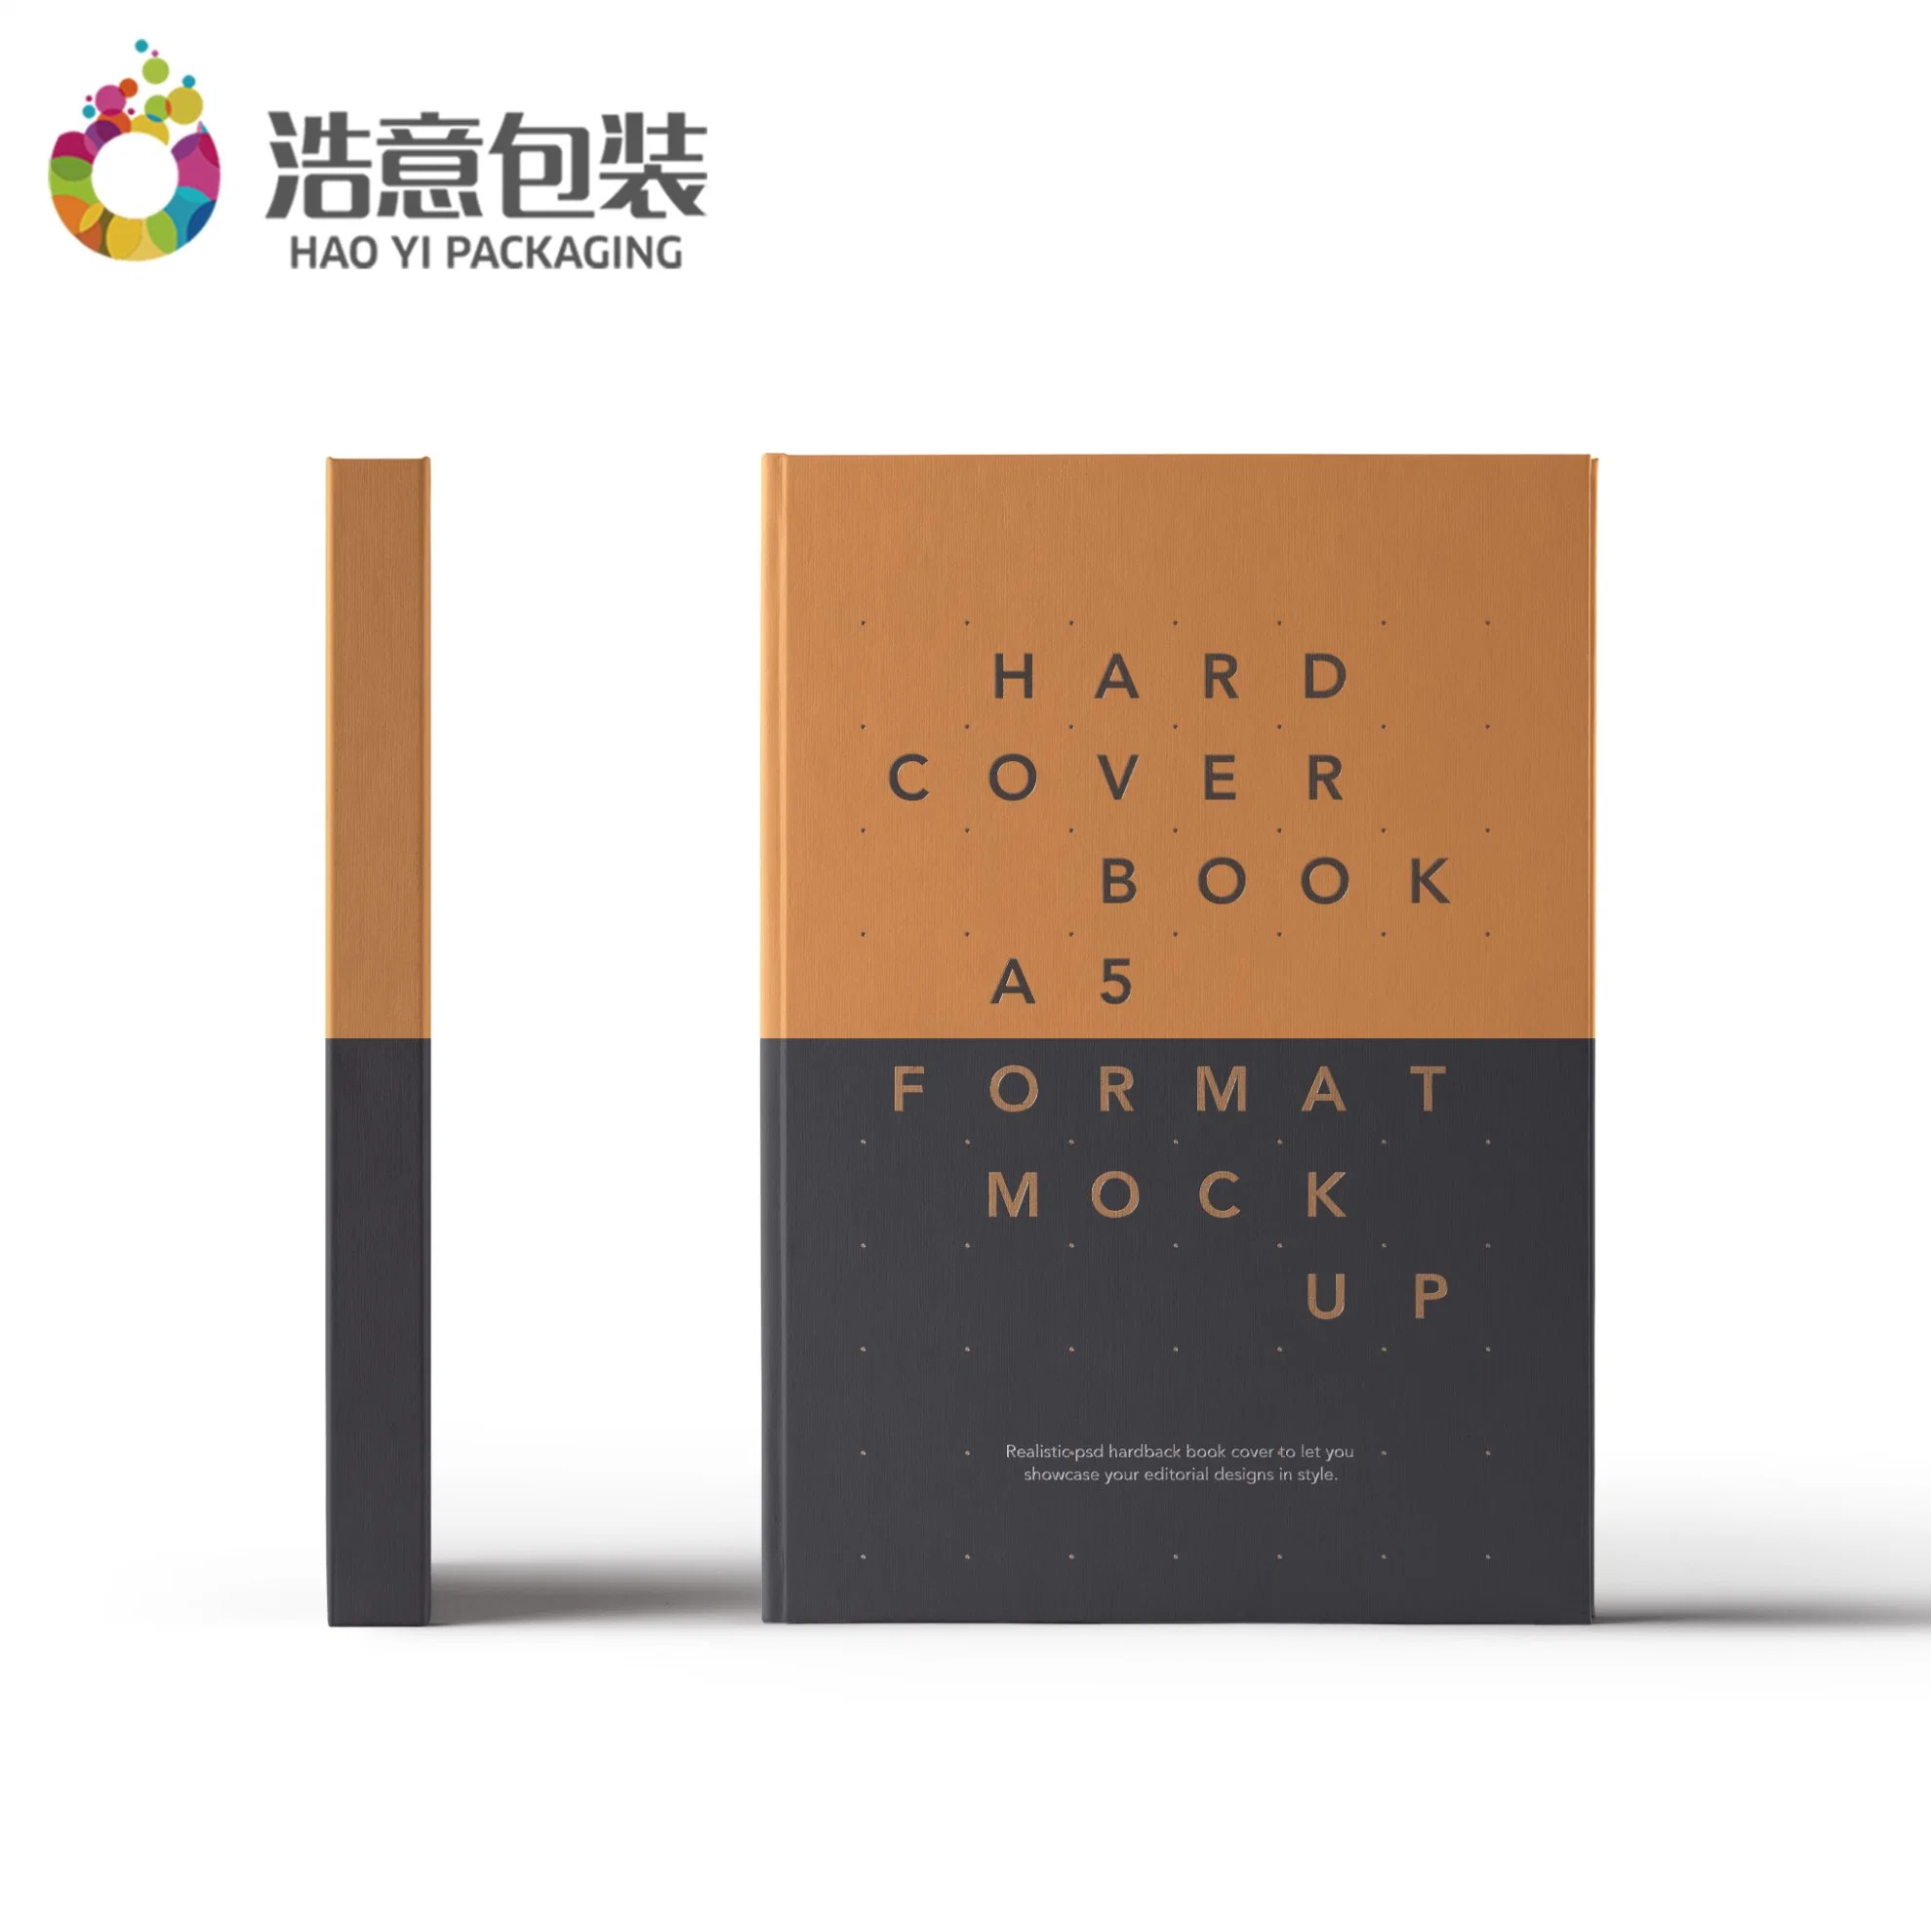 China Wholesale/Supplier Promotional Custom Packaging & Printing High quality/High cost performance Gift Set Note Book